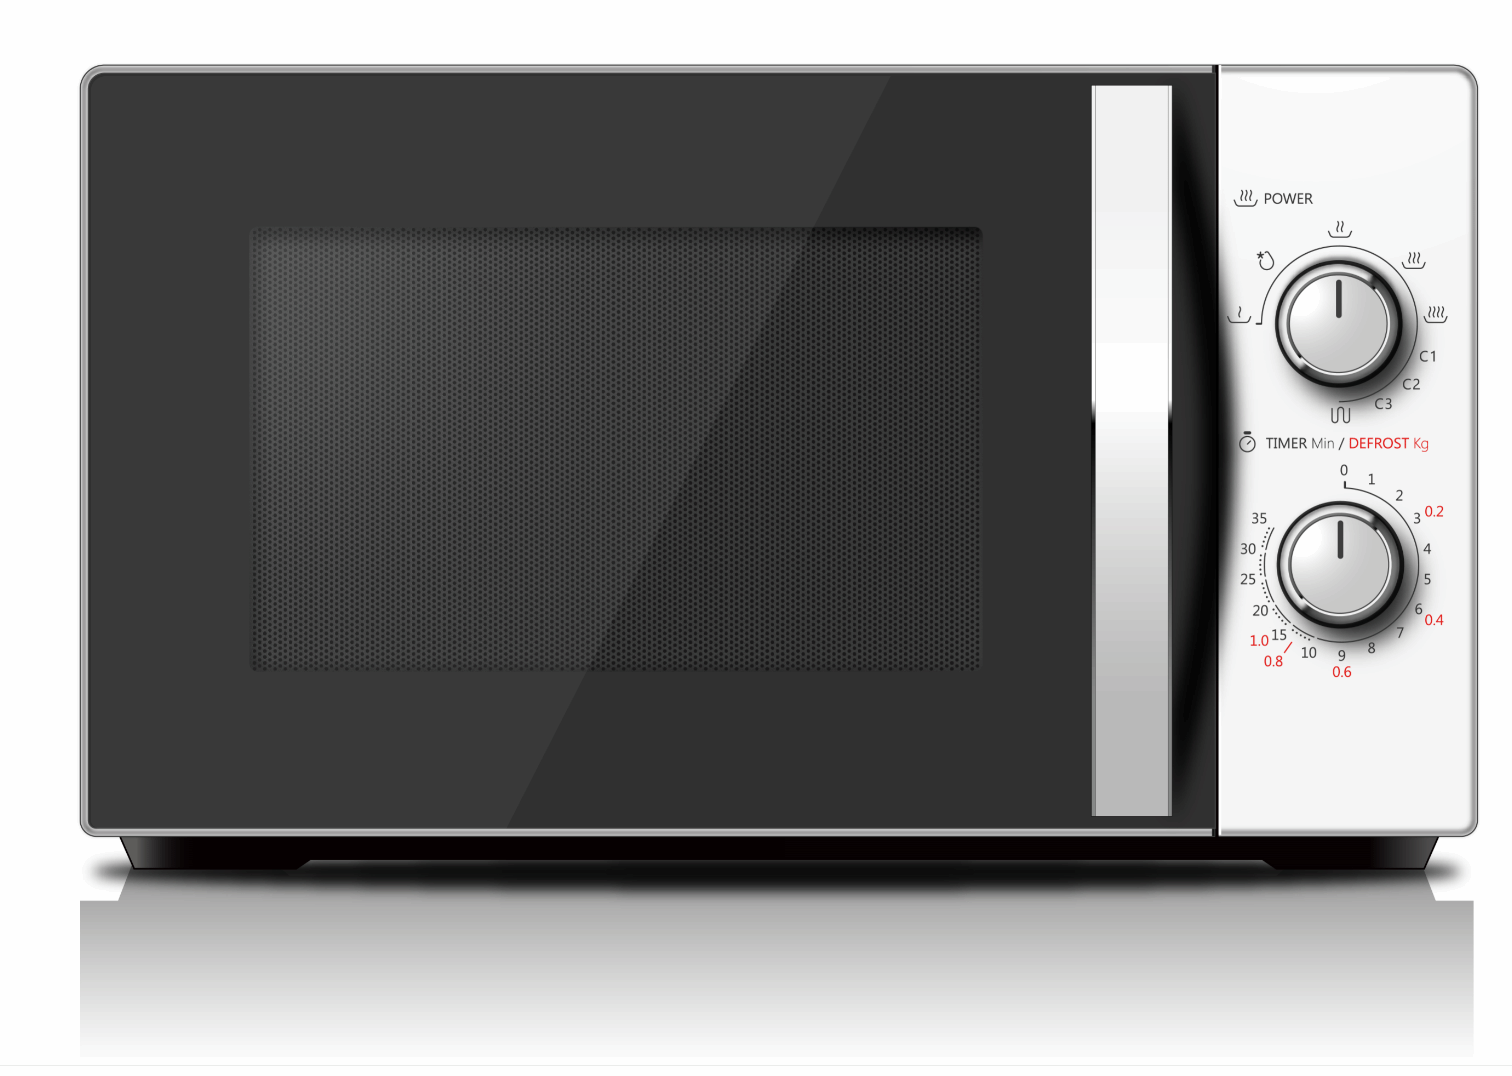 20L SOLO MICROWAVE OVEN